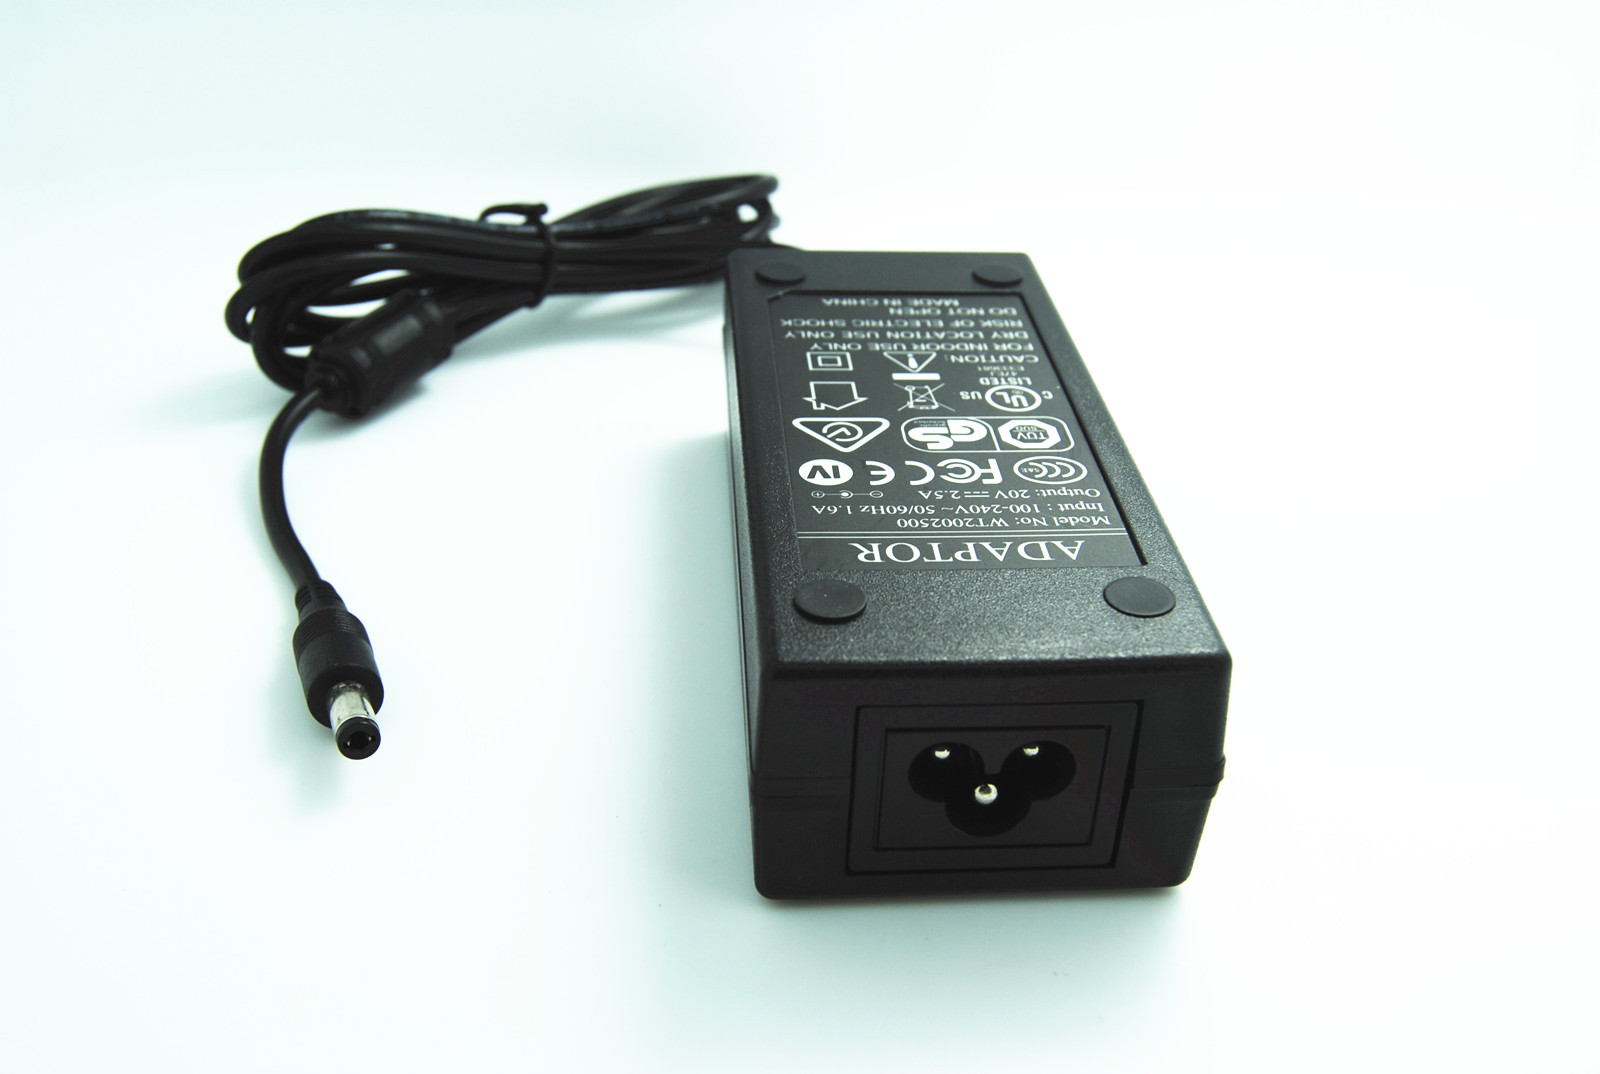 C6 3 Pin CEC / ERP Switching Power Supply Foreign Power Adapters with 1.2M DC Cord